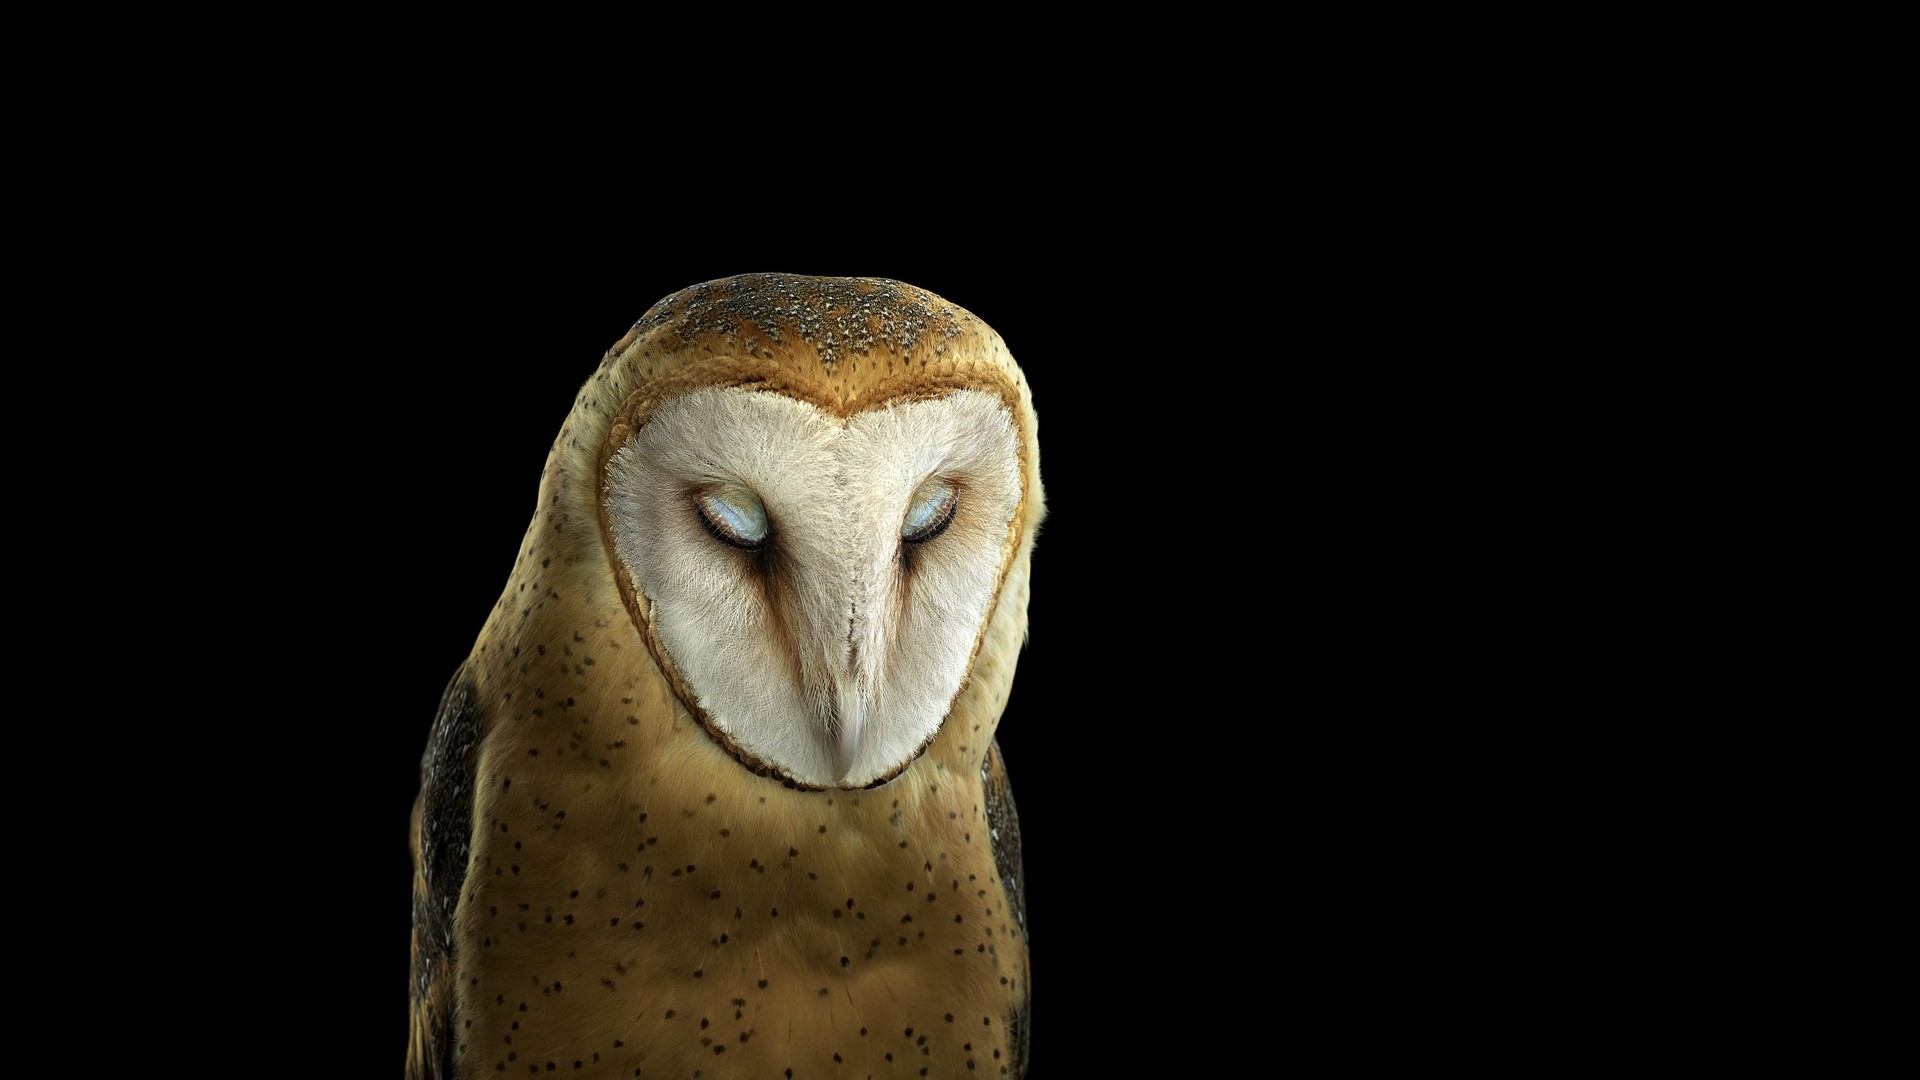 General 1920x1080 photography animals owl simple background birds black background